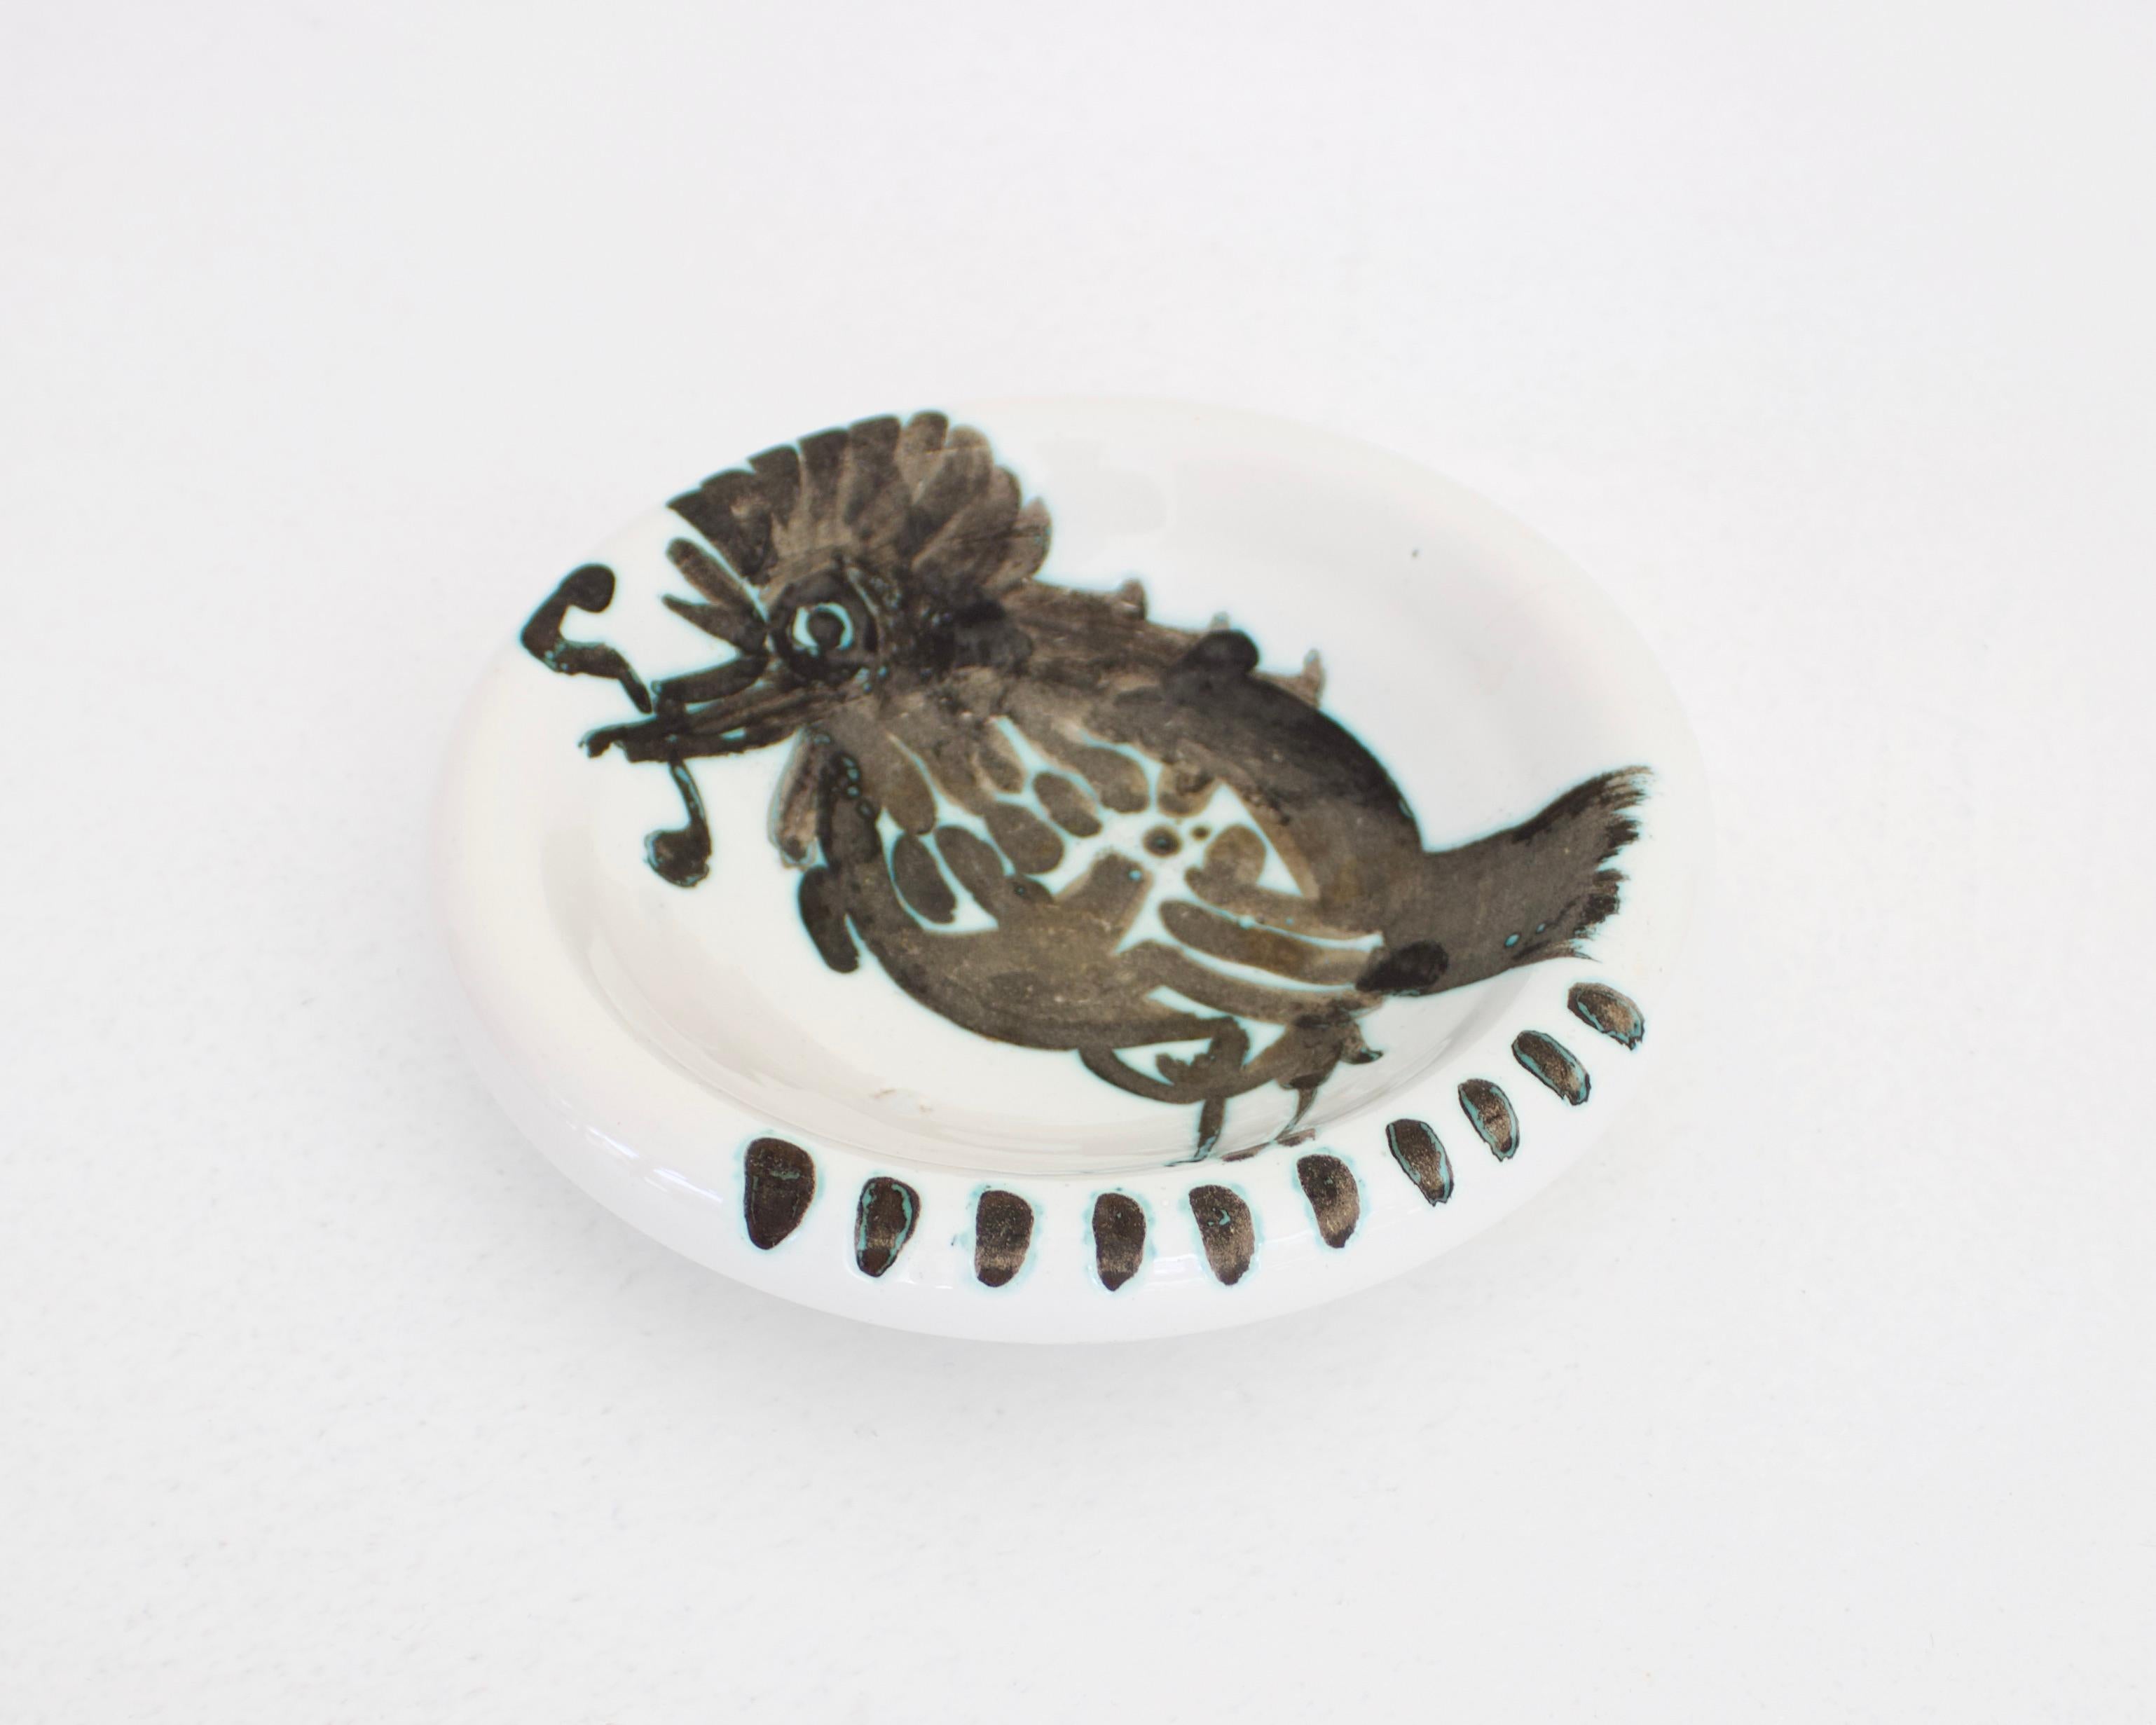 French Pablo Picasso Ceramic Dish Editions Picasso Madoura Bird With With Worm 1952 For Sale